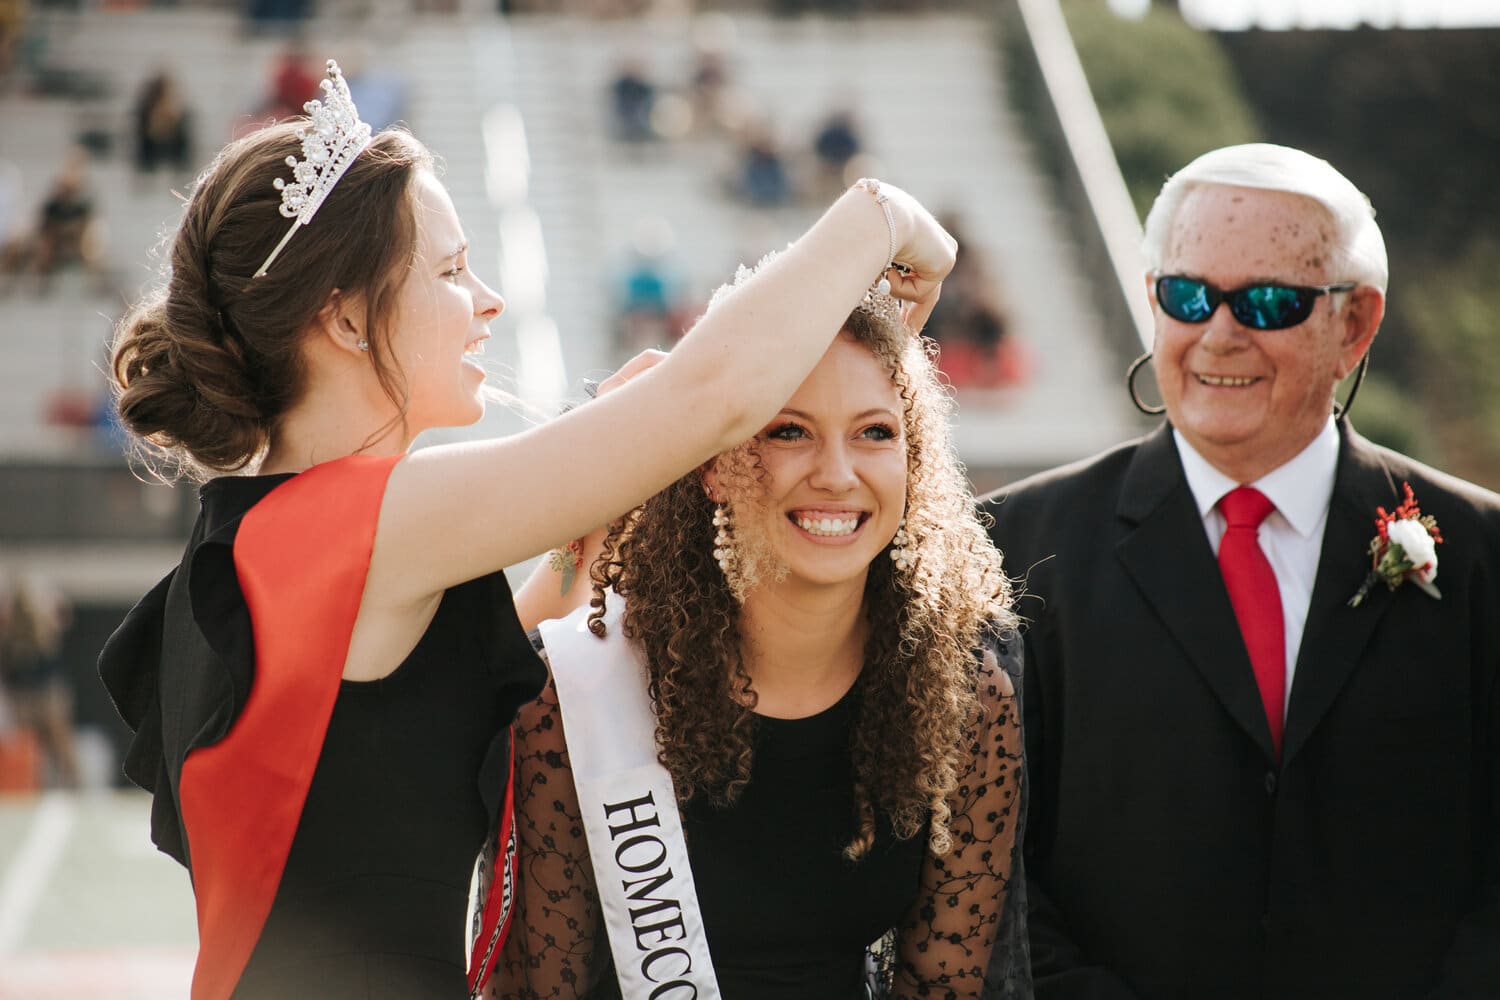 It isn’t homecoming if there isn’t a crown. This year’s homecoming queen, Hannah Turner, was crowned by former homecoming queen Lauren Hawthorne at this past Saturday’s game.